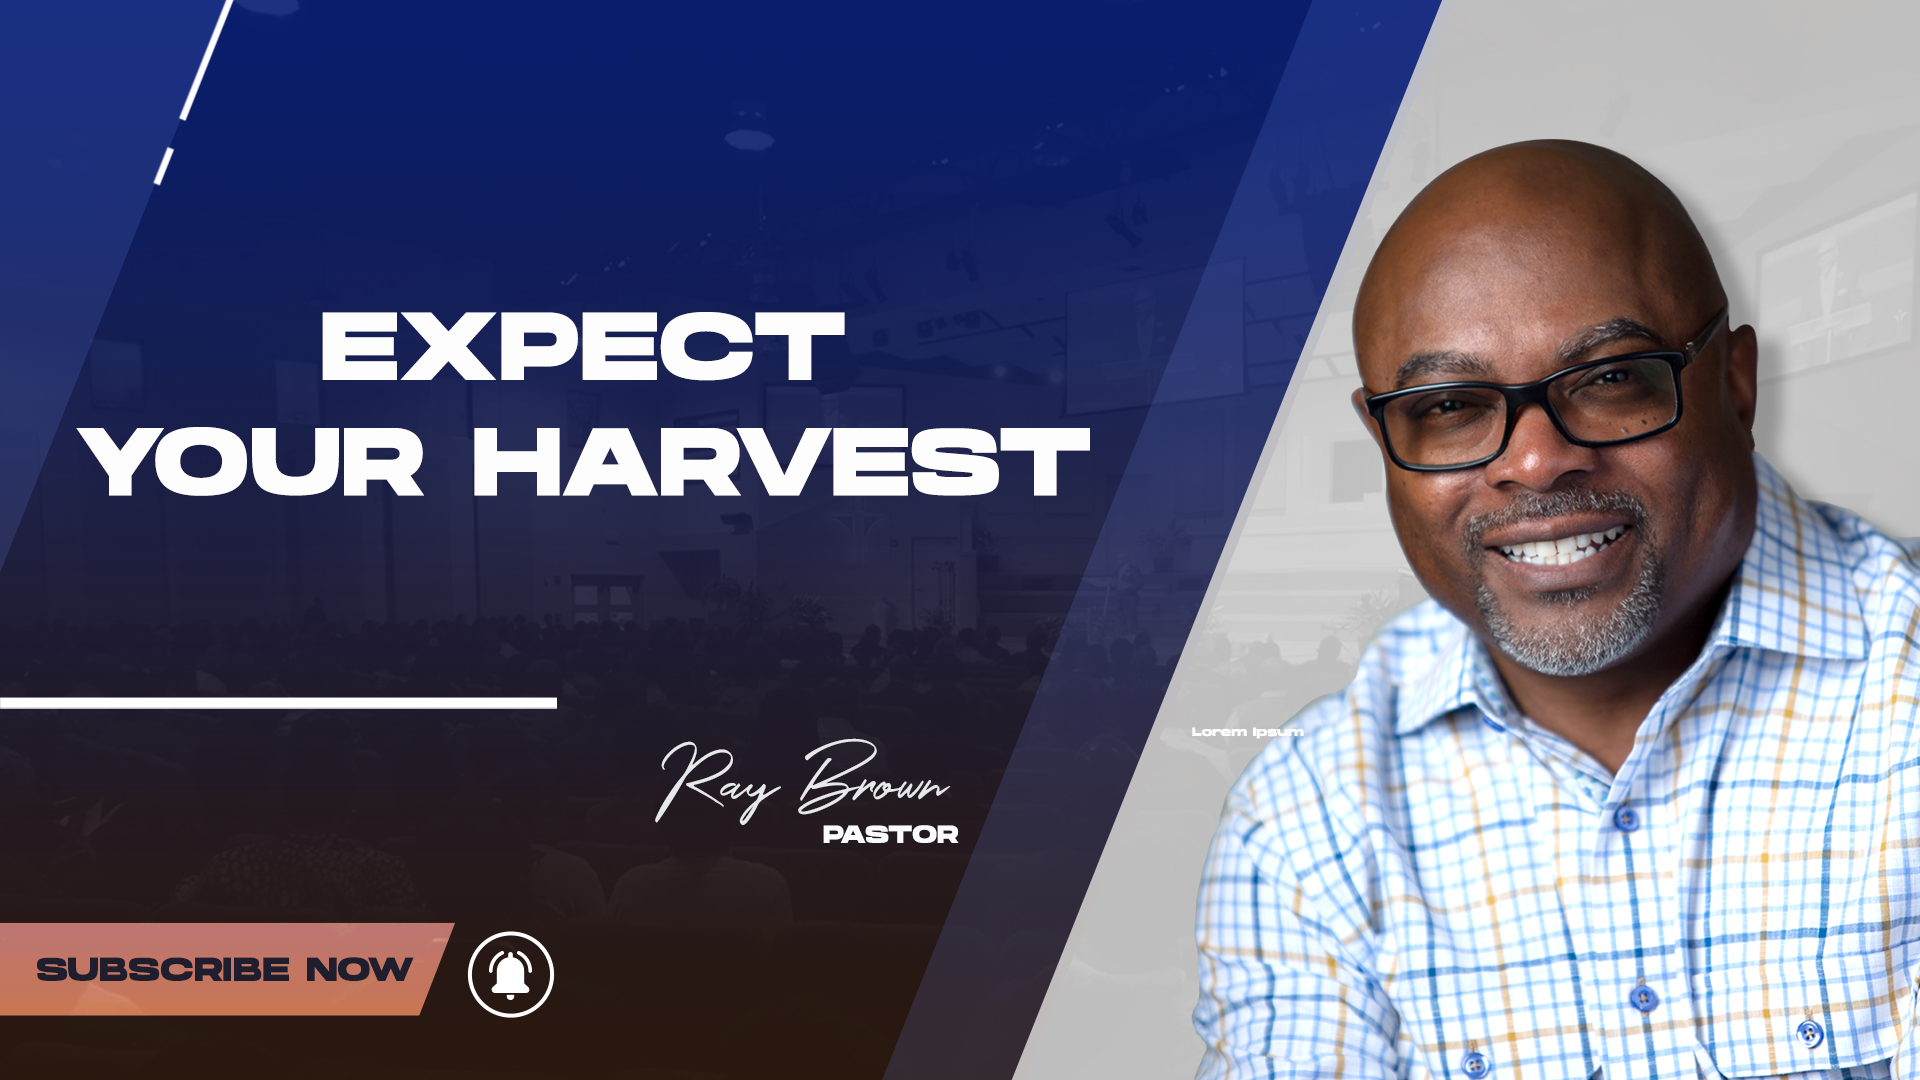 10302022_Expect-Your-Harvest